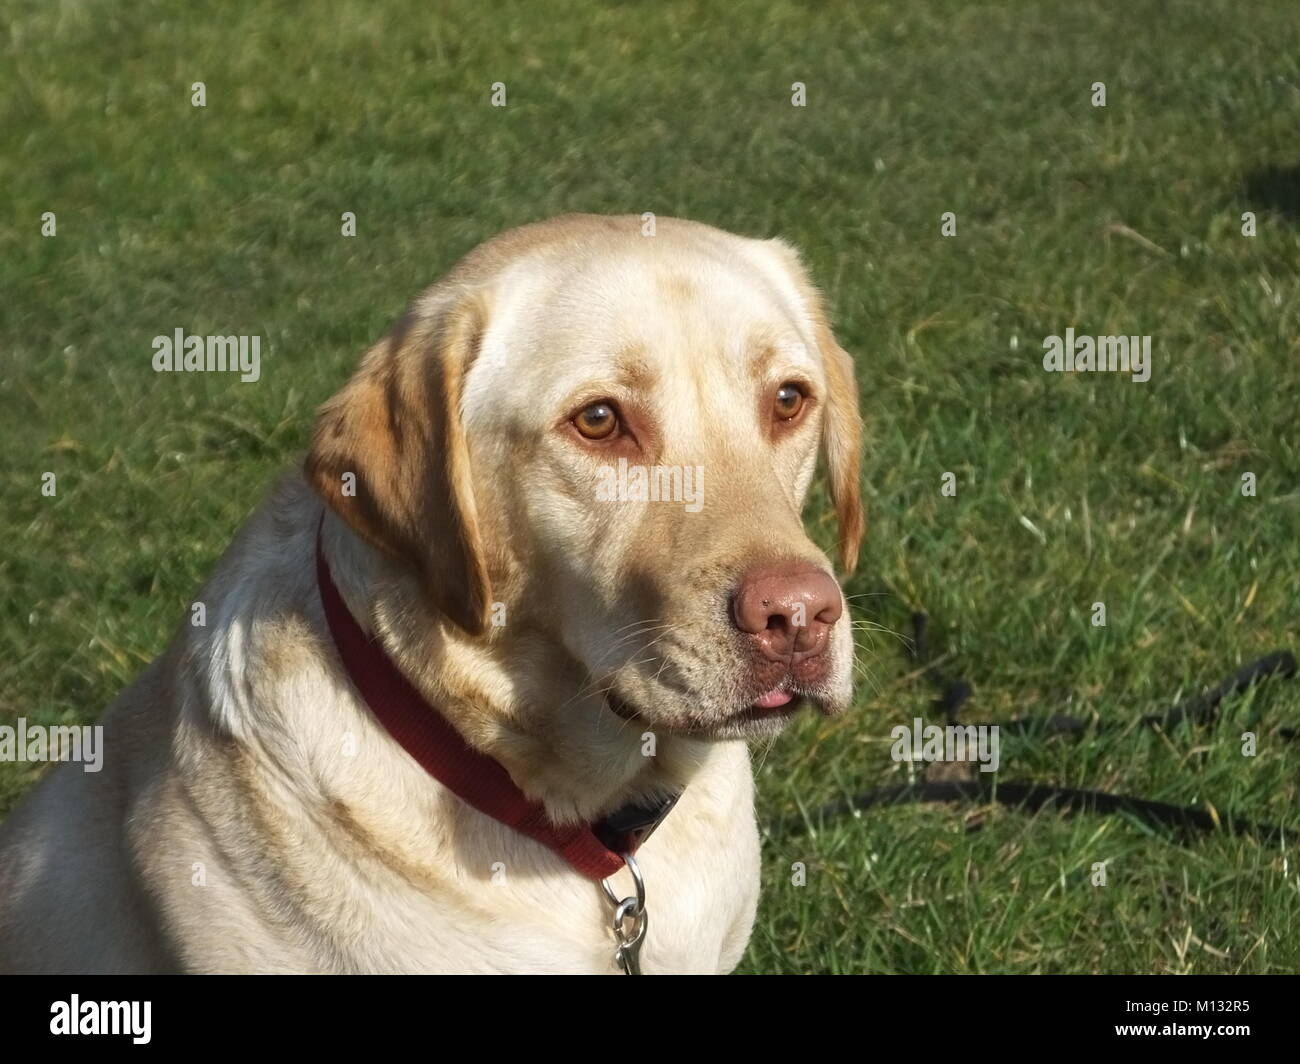 Beautiful Yellow Labrador waiting and catching a tennis ball set of action shots Stock Photo